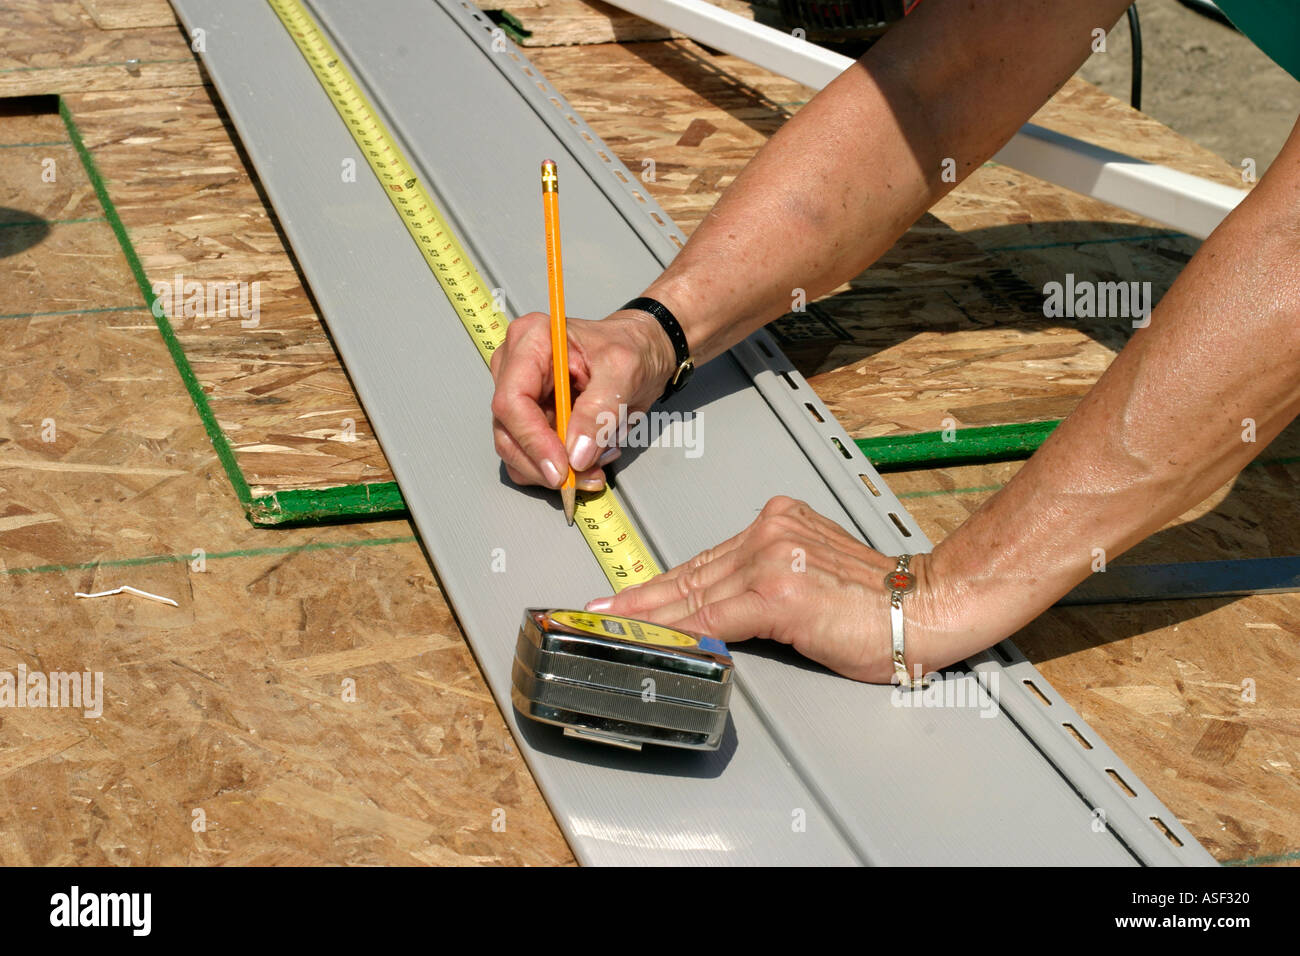 Volunteer helps build house for low income family through Habitat for Humanity Stock Photo